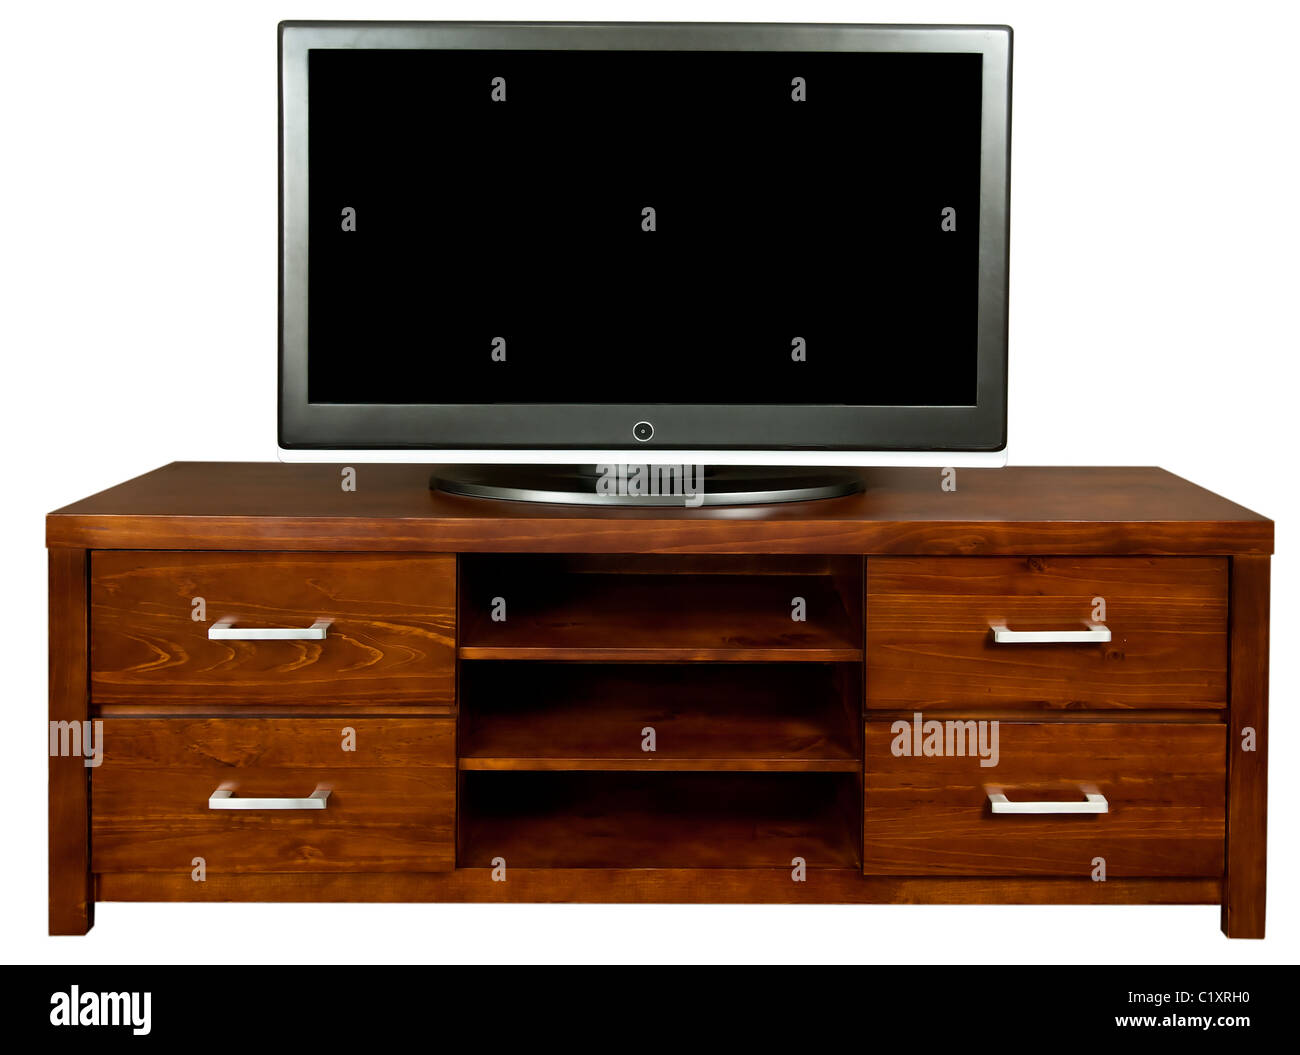 A classic brown wooden TV cabinet with a large LCD TV on it. Stock Photo